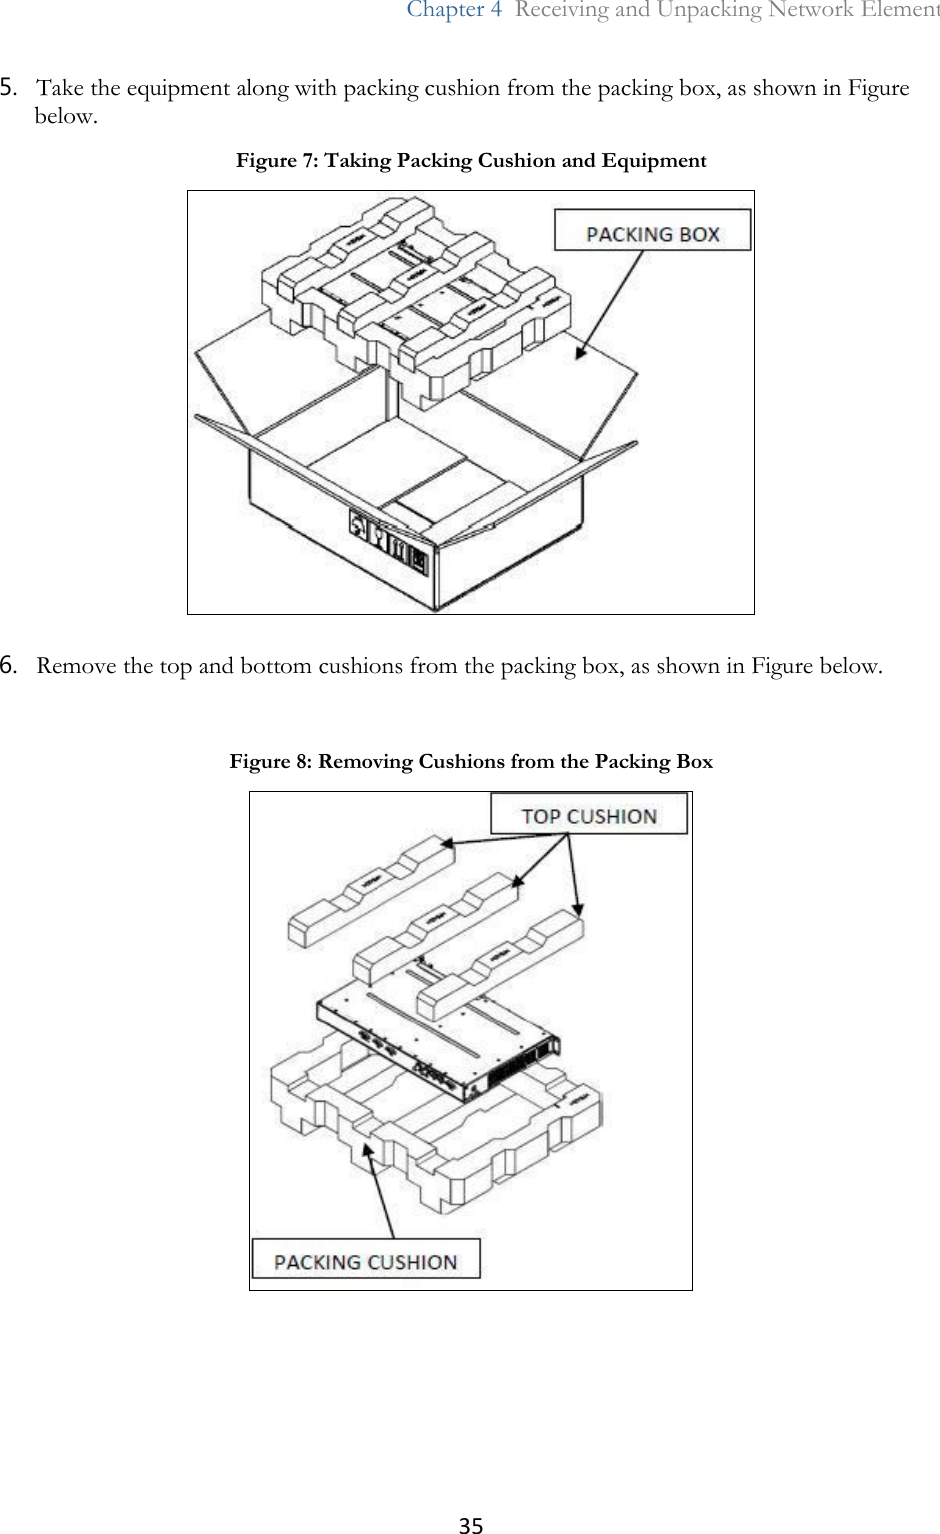 35  Chapter 4  Receiving and Unpacking Network Element  5. Take the equipment along with packing cushion from the packing box, as shown in Figure below. 6. Remove the top and bottom cushions from the packing box, as shown in Figure below. Figure 7: Taking Packing Cushion and Equipment   Figure 8: Removing Cushions from the Packing Box  